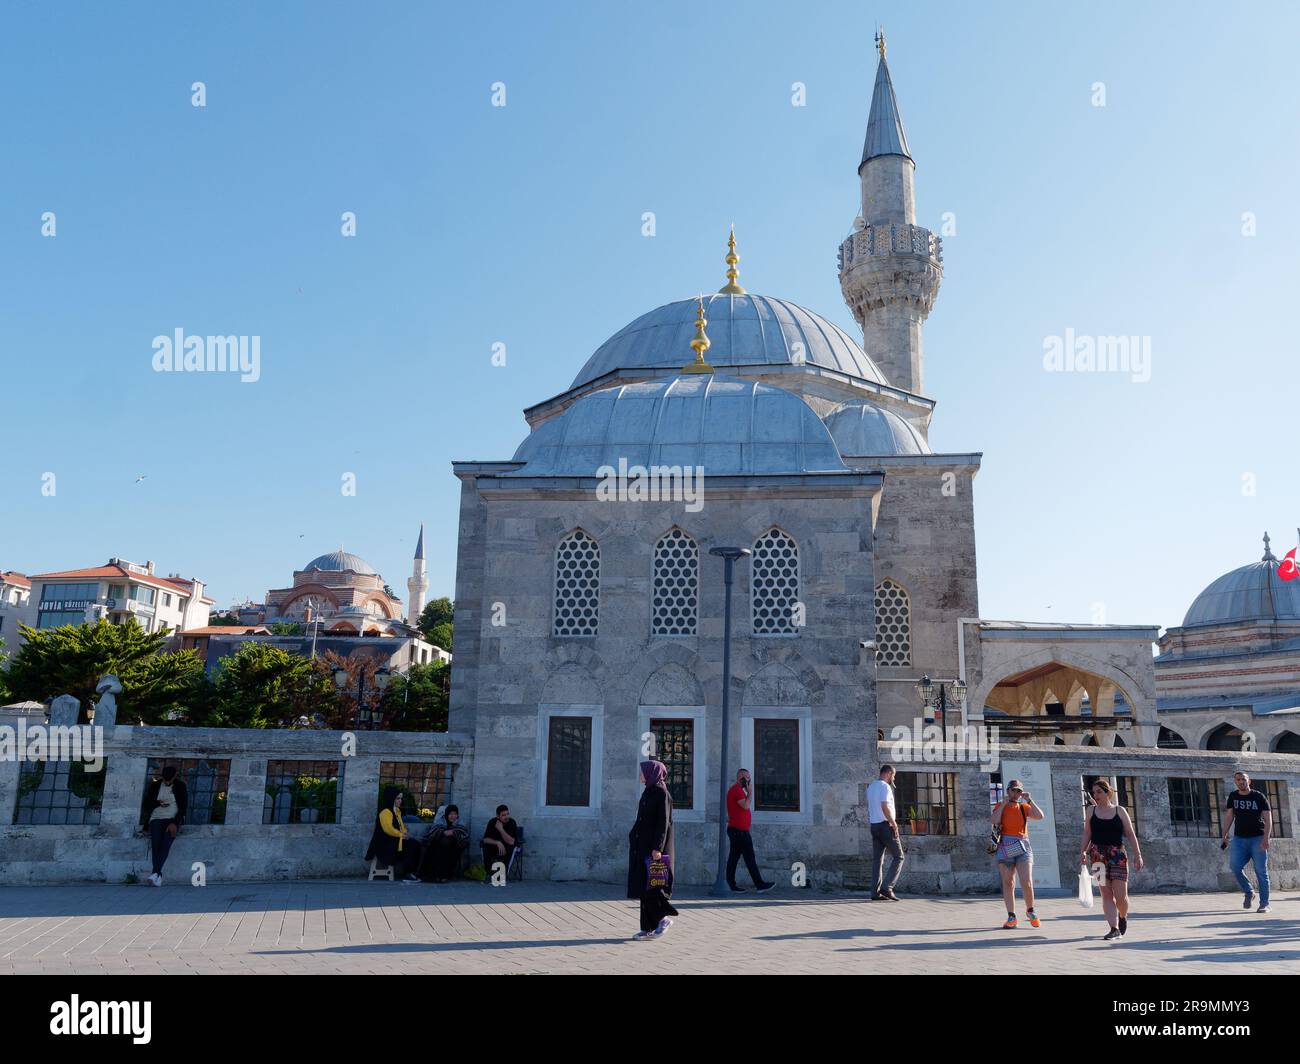 People in front of the small Şemsi Pasha Mosque, some taking shade on a summers day in the town of Uskudar, Istanbul, Turkey Stock Photo